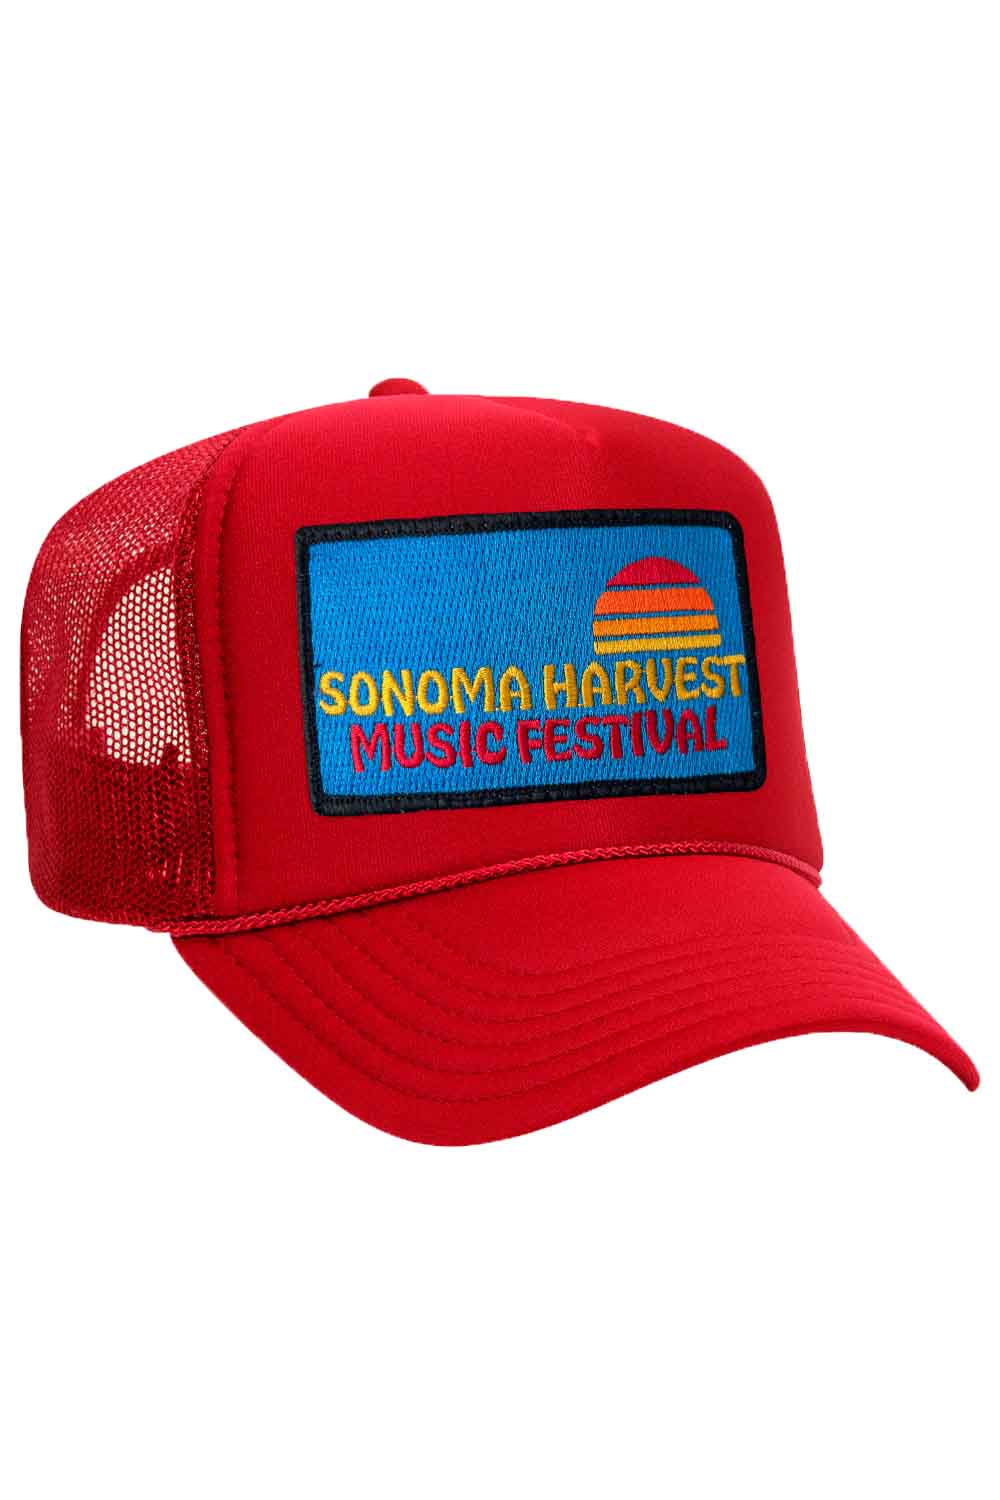 SONOMA HARVEST VINTAGE LOW RISE TRUCKER HAT HATS Aviator Nation OS RED 